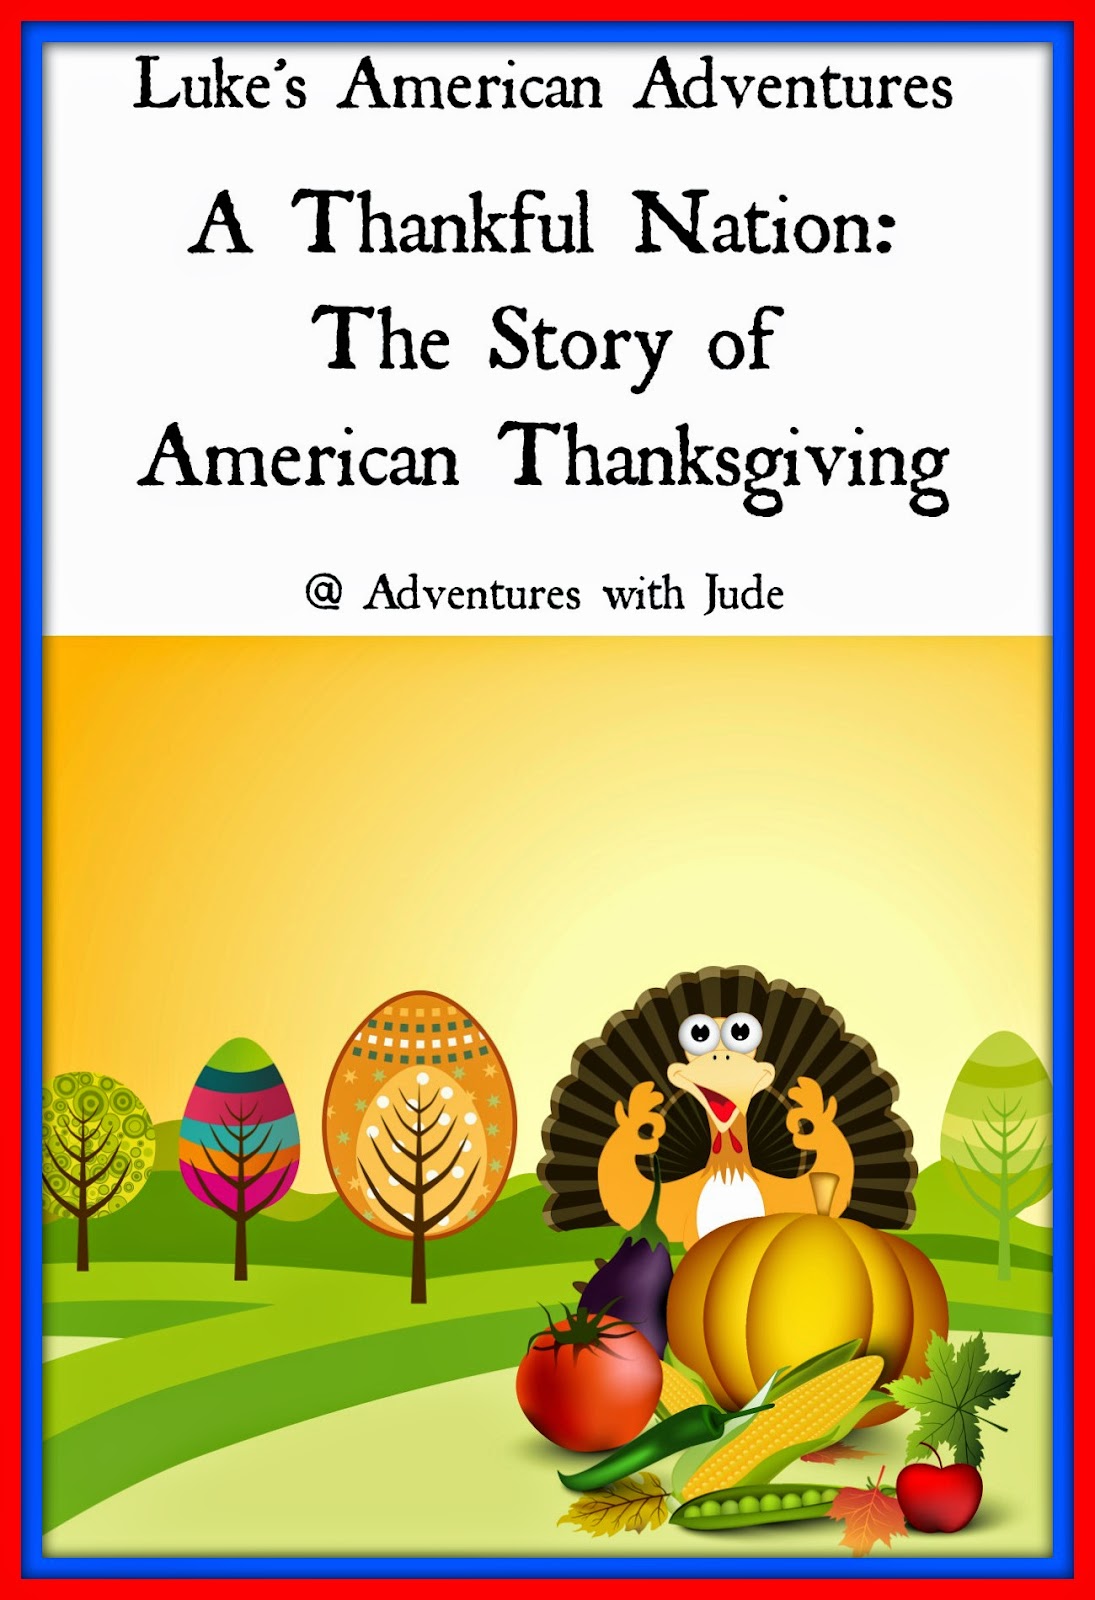 Luke's American Adventures: The Story of American Thanksgiving